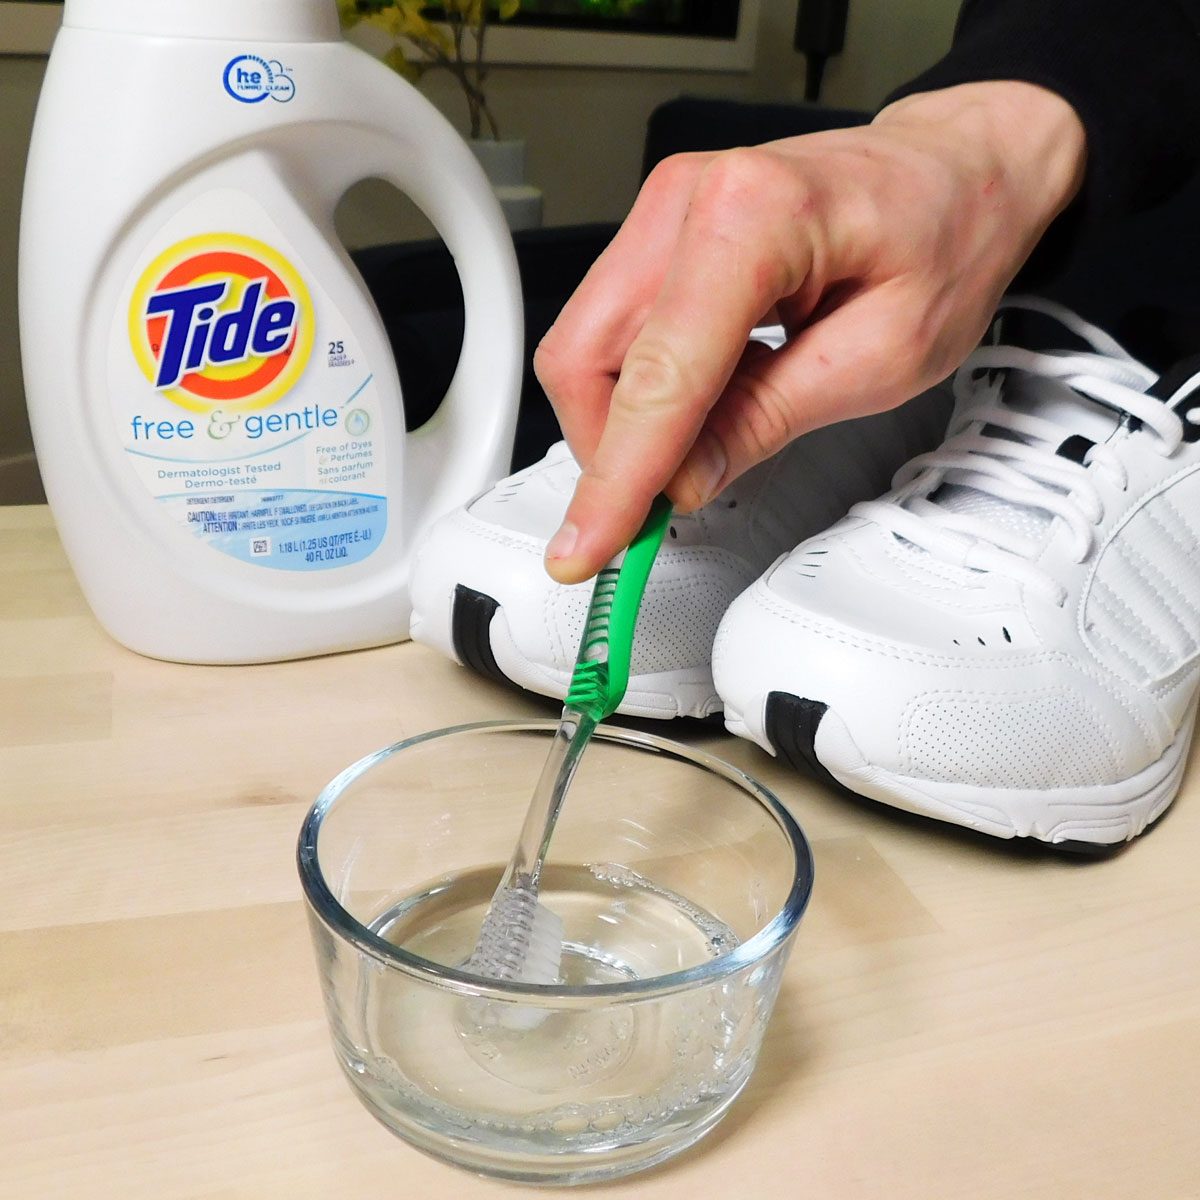 How to Clean White Shoes | Family Handyman